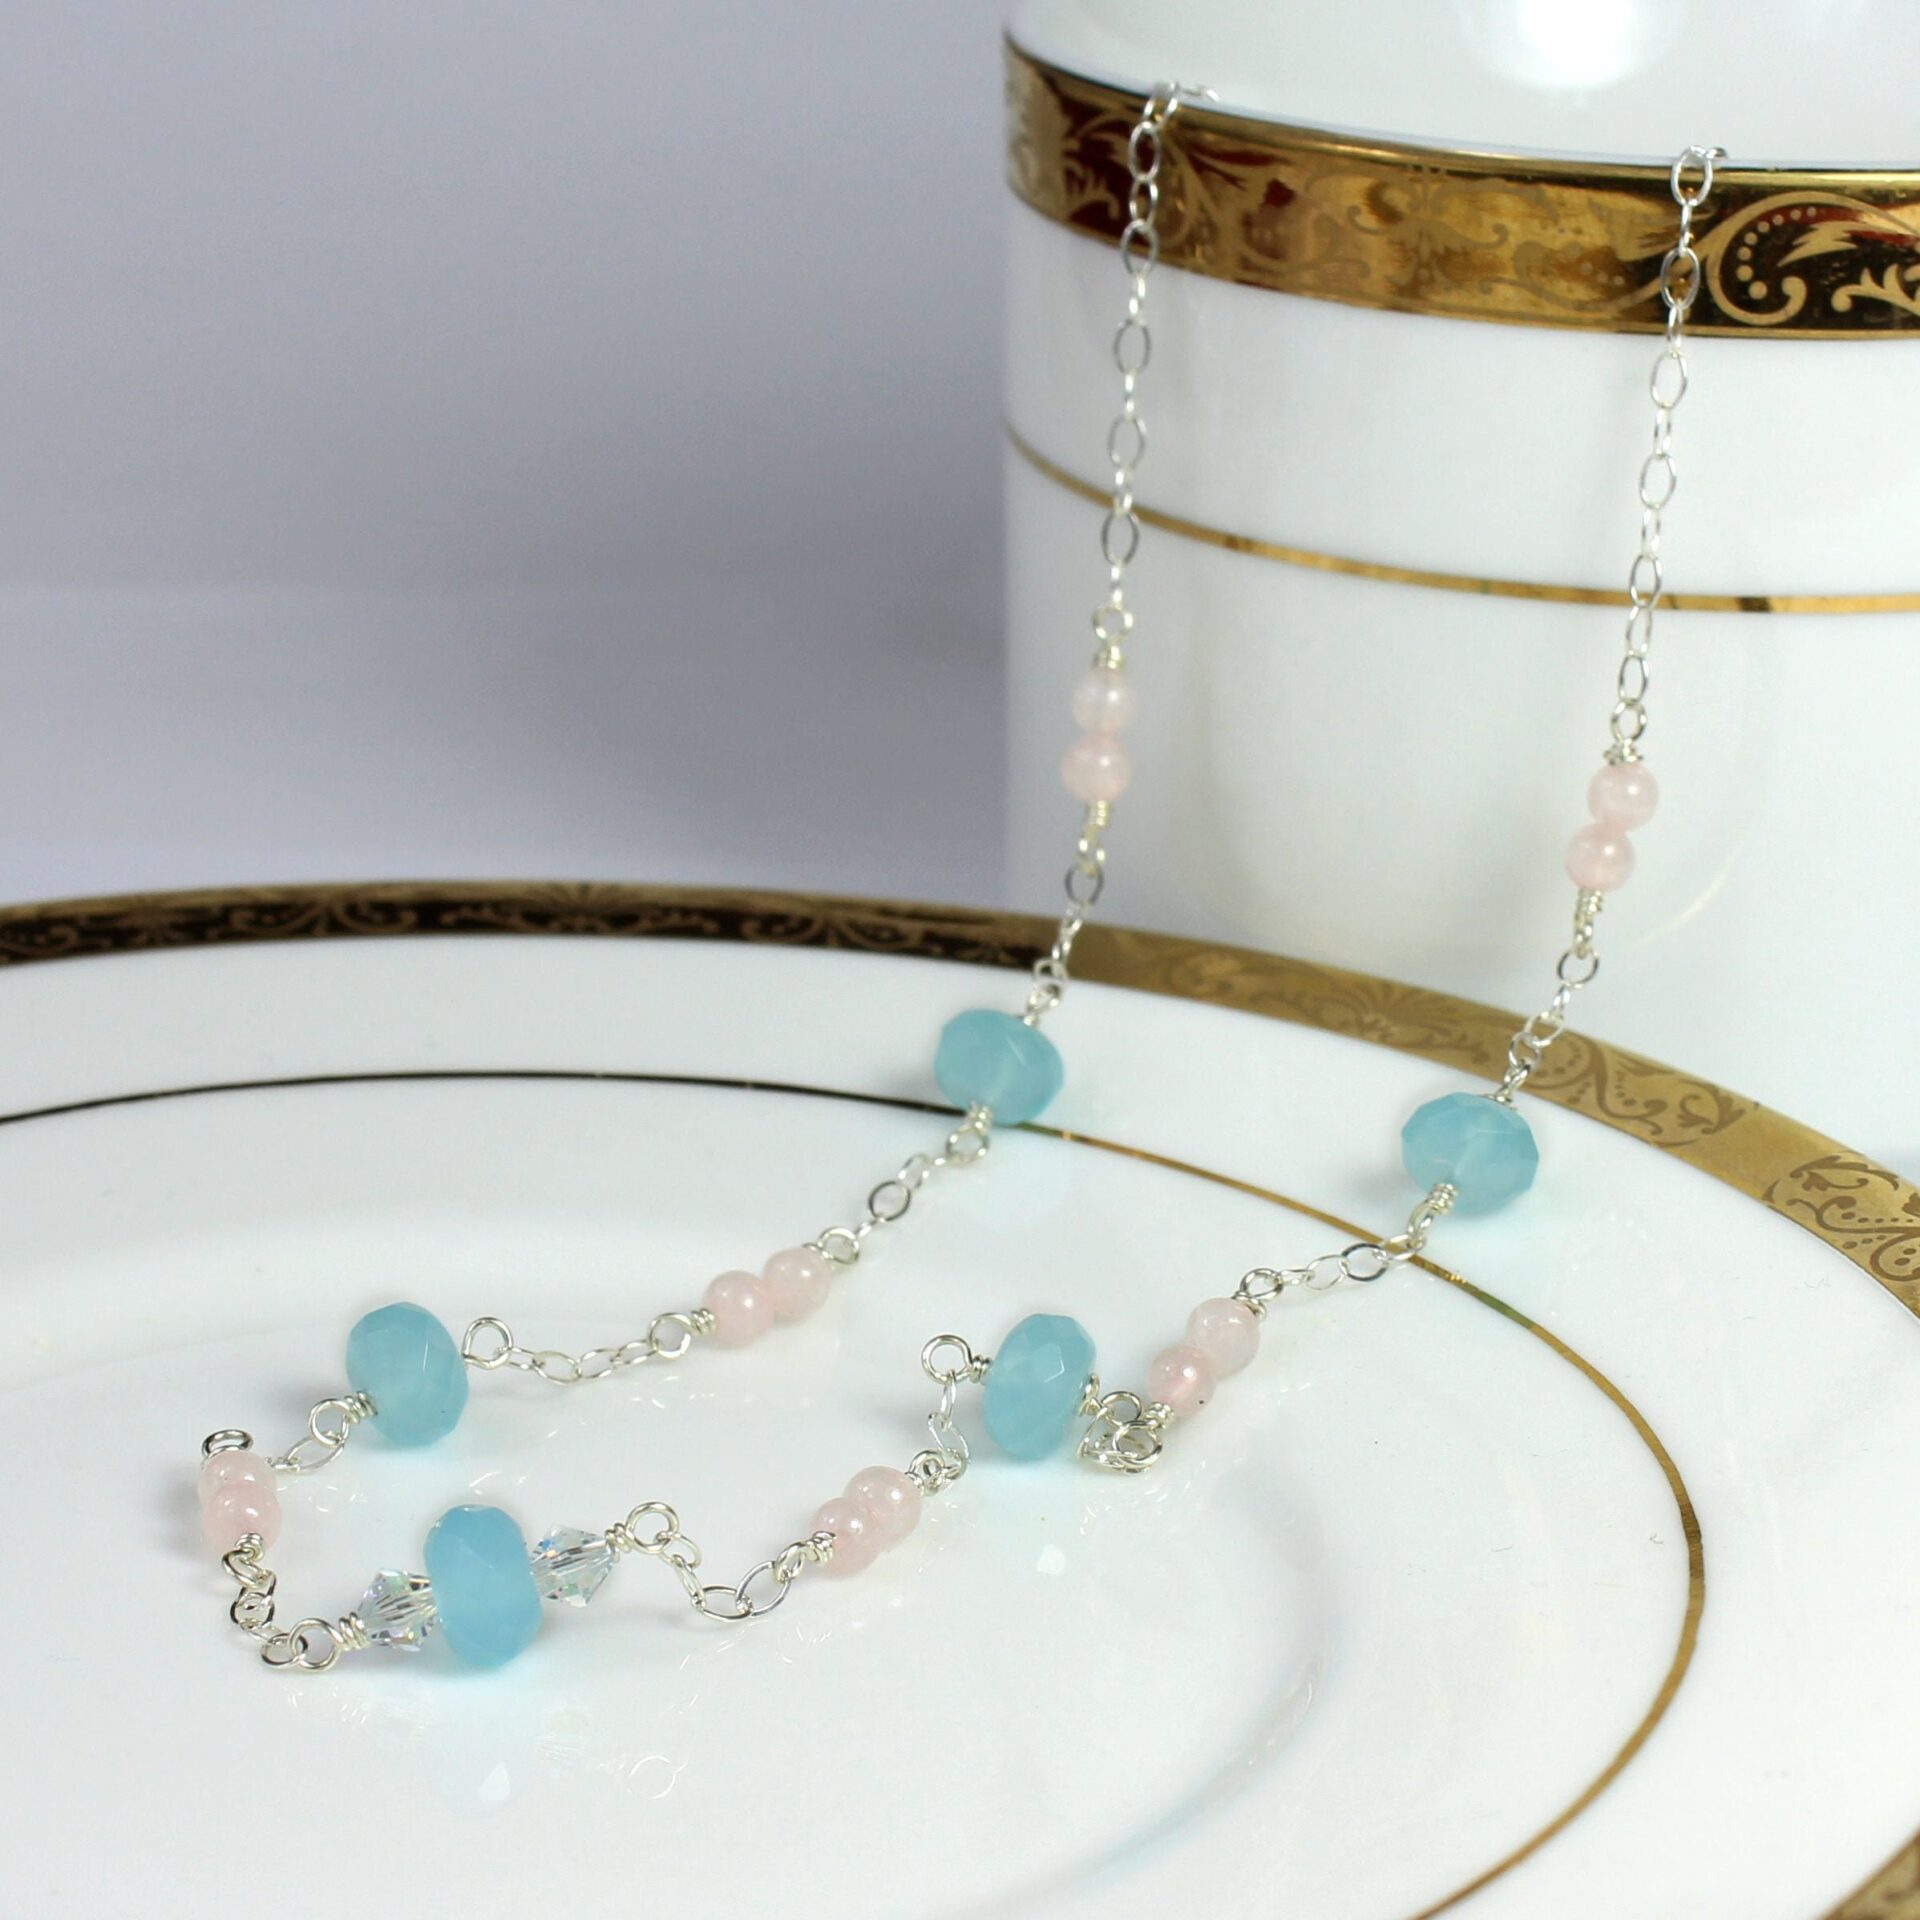 Blue Chalcedony and Rose Quartz Necklace